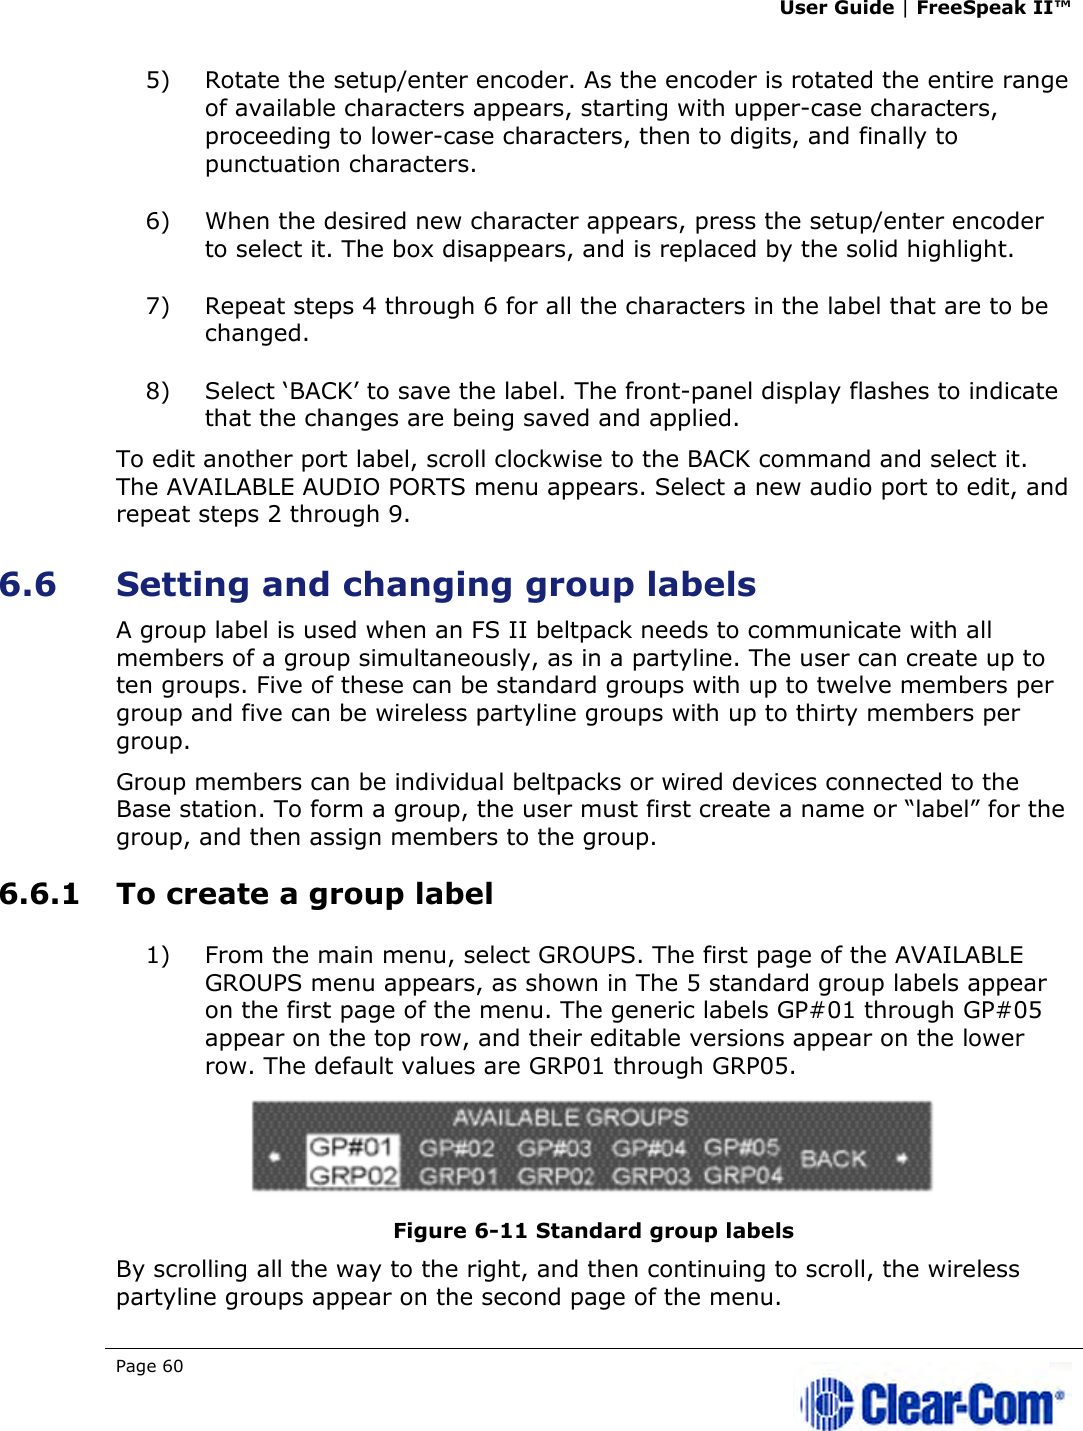 User Guide | FreeSpeak II™  Page 60   5) Rotate the setup/enter encoder. As the encoder is rotated the entire range of available characters appears, starting with upper-case characters, proceeding to lower-case characters, then to digits, and finally to punctuation characters.  6) When the desired new character appears, press the setup/enter encoder to select it. The box disappears, and is replaced by the solid highlight. 7) Repeat steps 4 through 6 for all the characters in the label that are to be changed.  8) Select ‘BACK’ to save the label. The front-panel display flashes to indicate that the changes are being saved and applied.  To edit another port label, scroll clockwise to the BACK command and select it. The AVAILABLE AUDIO PORTS menu appears. Select a new audio port to edit, and repeat steps 2 through 9. 6.6 Setting and changing group labels A group label is used when an FS II beltpack needs to communicate with all members of a group simultaneously, as in a partyline. The user can create up to ten groups. Five of these can be standard groups with up to twelve members per group and five can be wireless partyline groups with up to thirty members per group.  Group members can be individual beltpacks or wired devices connected to the Base station. To form a group, the user must first create a name or “label” for the group, and then assign members to the group.  6.6.1 To create a group label 1) From the main menu, select GROUPS. The first page of the AVAILABLE GROUPS menu appears, as shown in The 5 standard group labels appear on the first page of the menu. The generic labels GP#01 through GP#05 appear on the top row, and their editable versions appear on the lower row. The default values are GRP01 through GRP05.  Figure 6-11 Standard group labels By scrolling all the way to the right, and then continuing to scroll, the wireless partyline groups appear on the second page of the menu. 